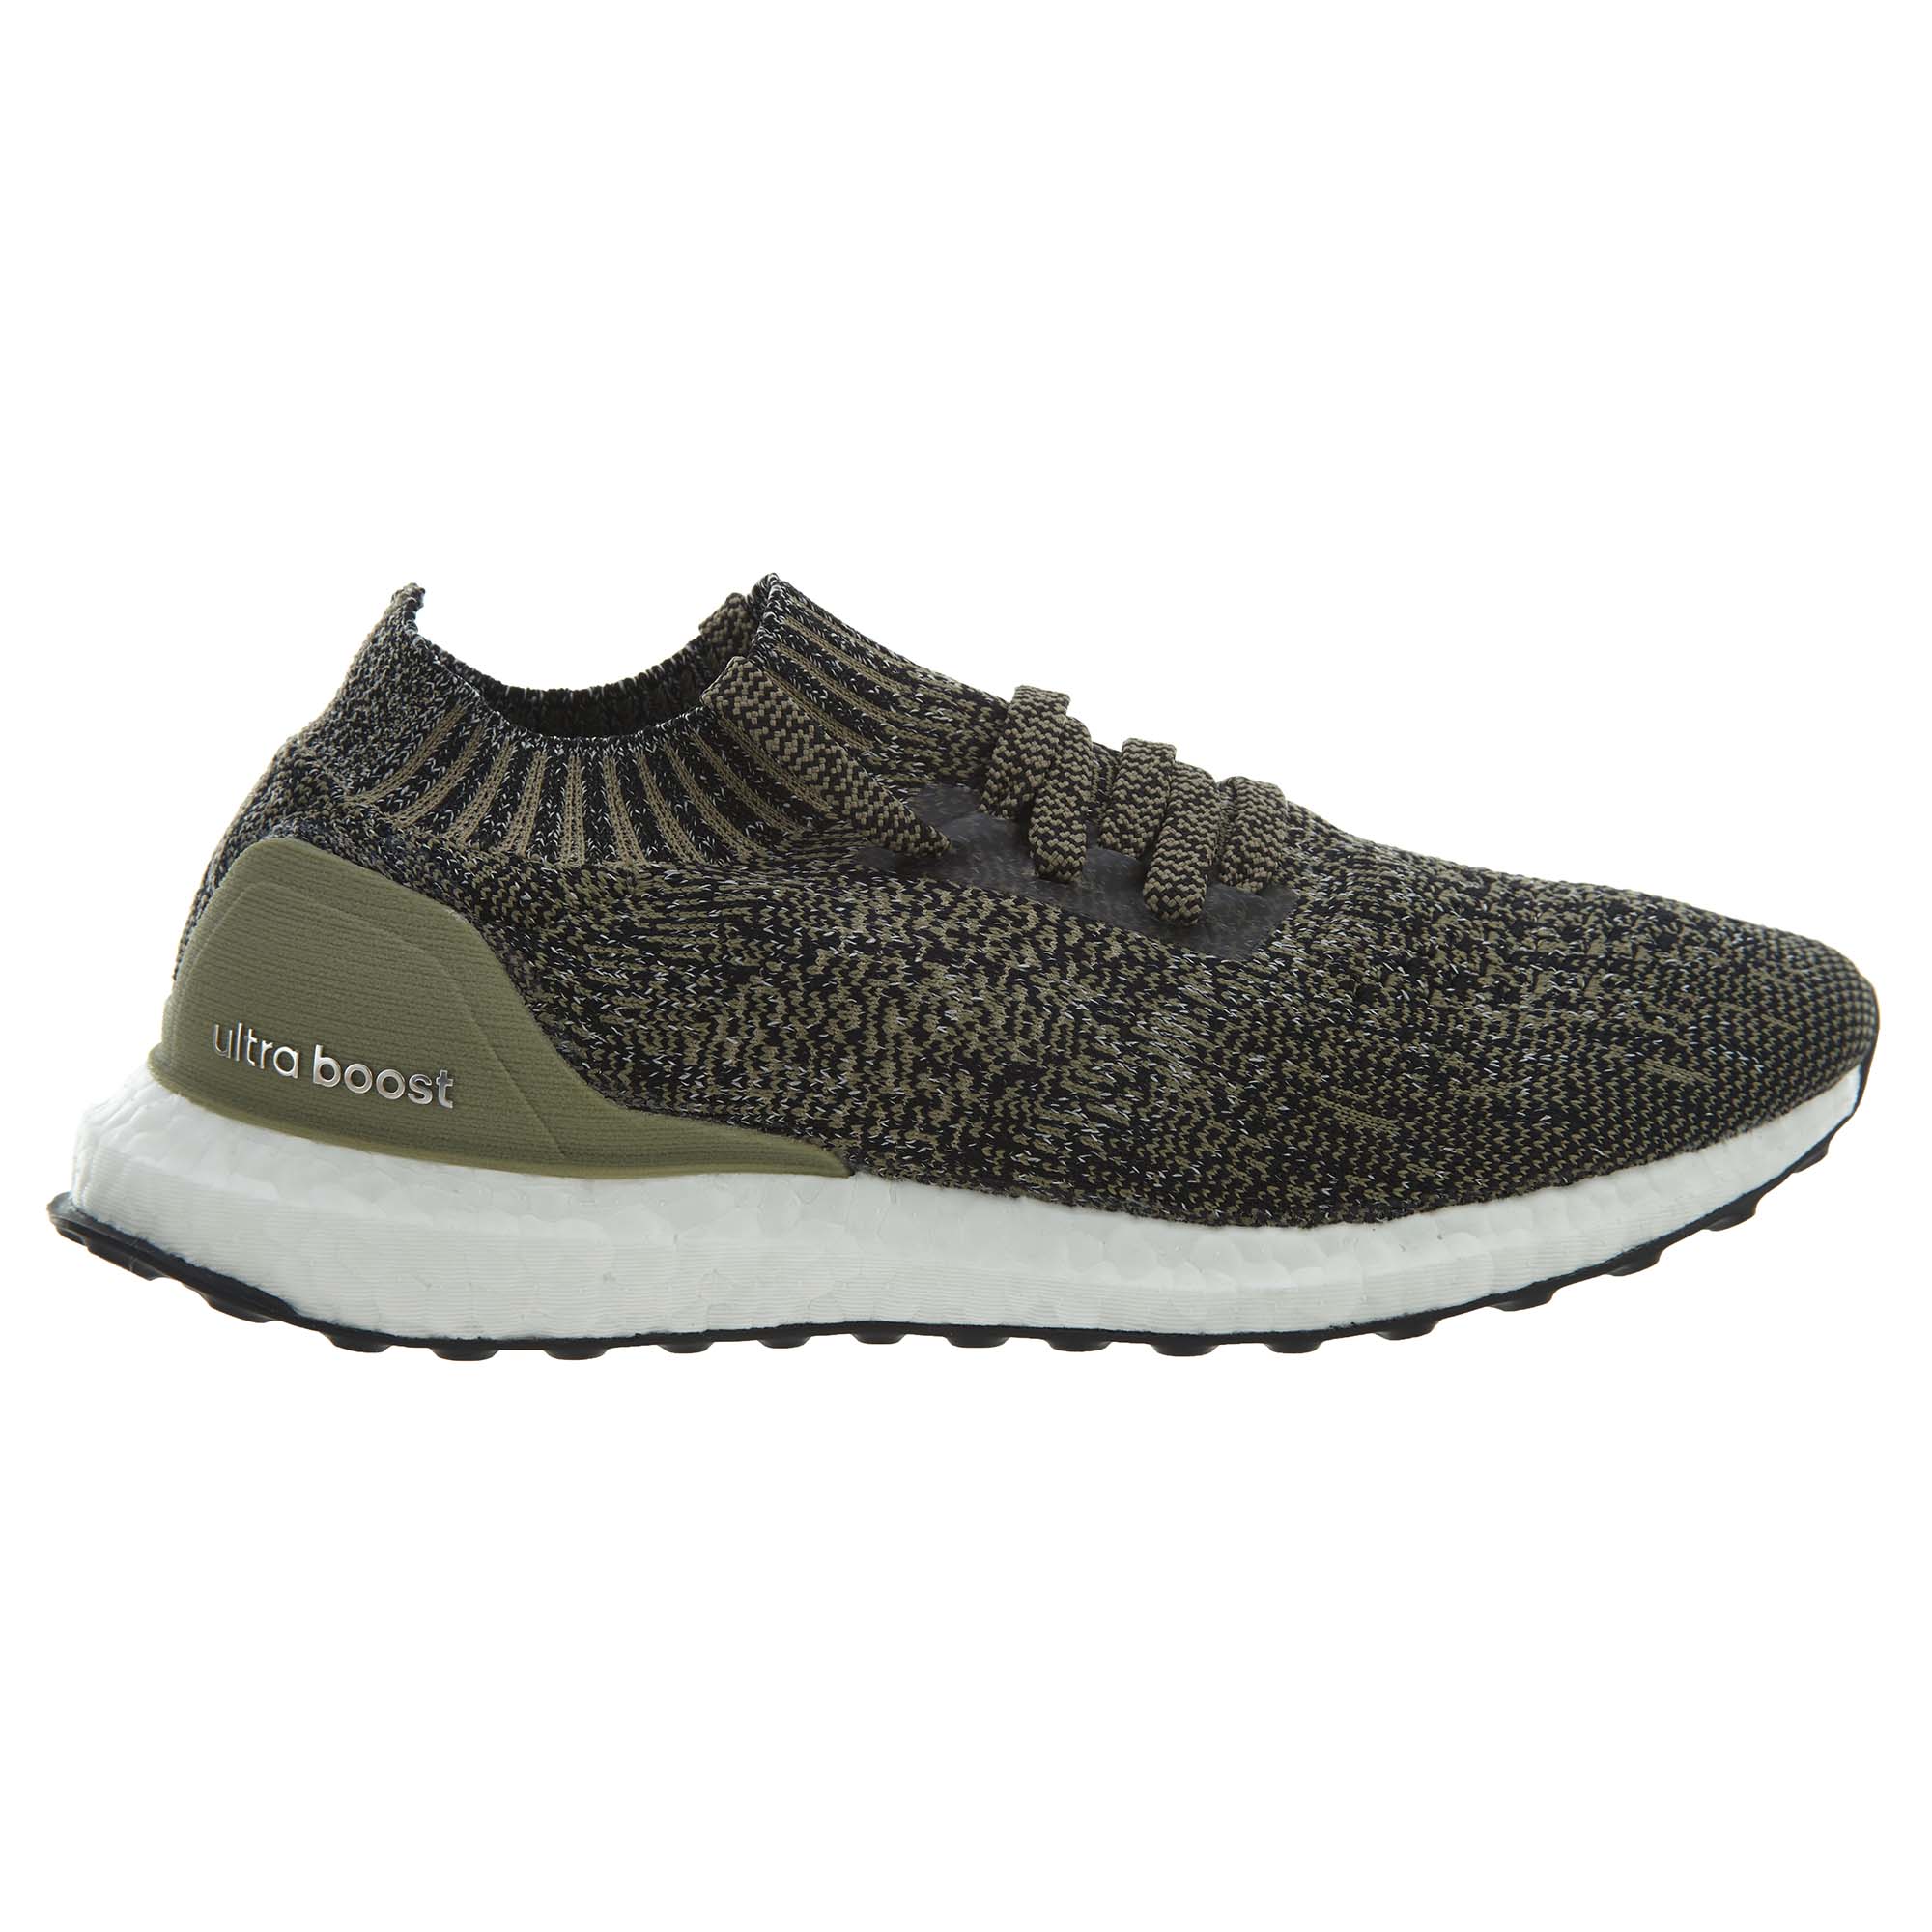 Adidas ultraboost uncaged (rare color)nmd